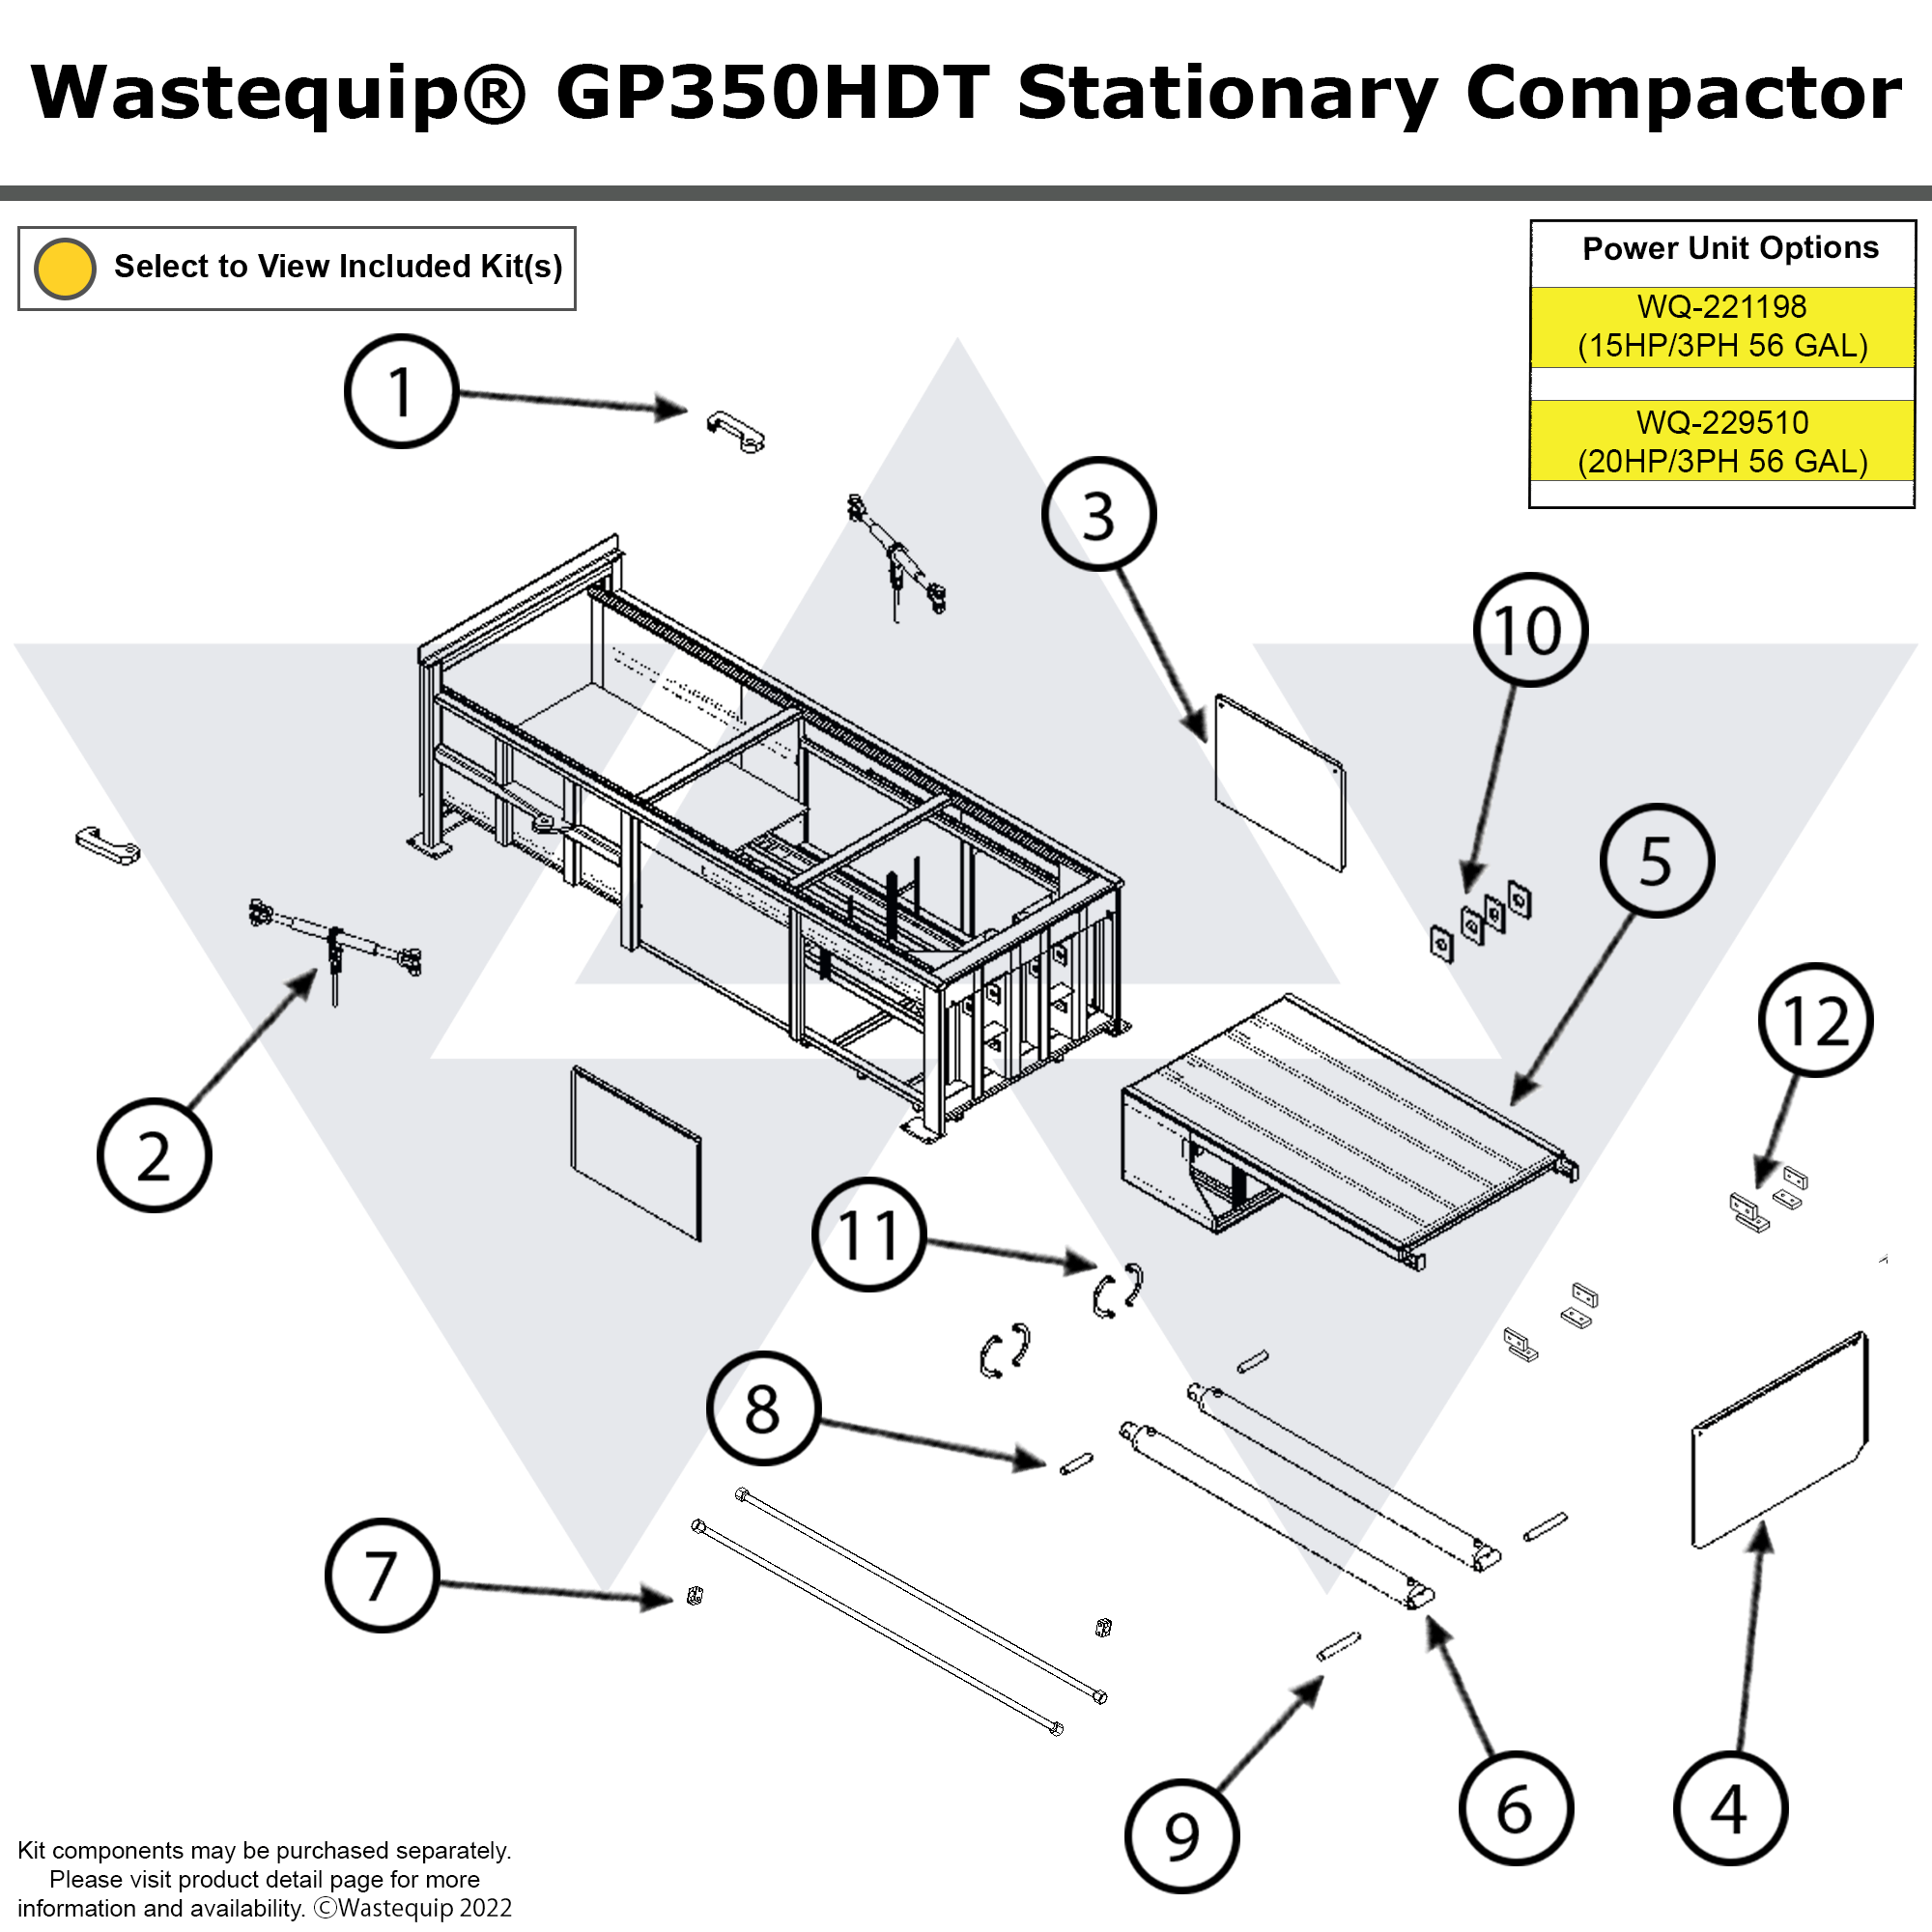 Wastequip® GP350HDT Stationary Compactor